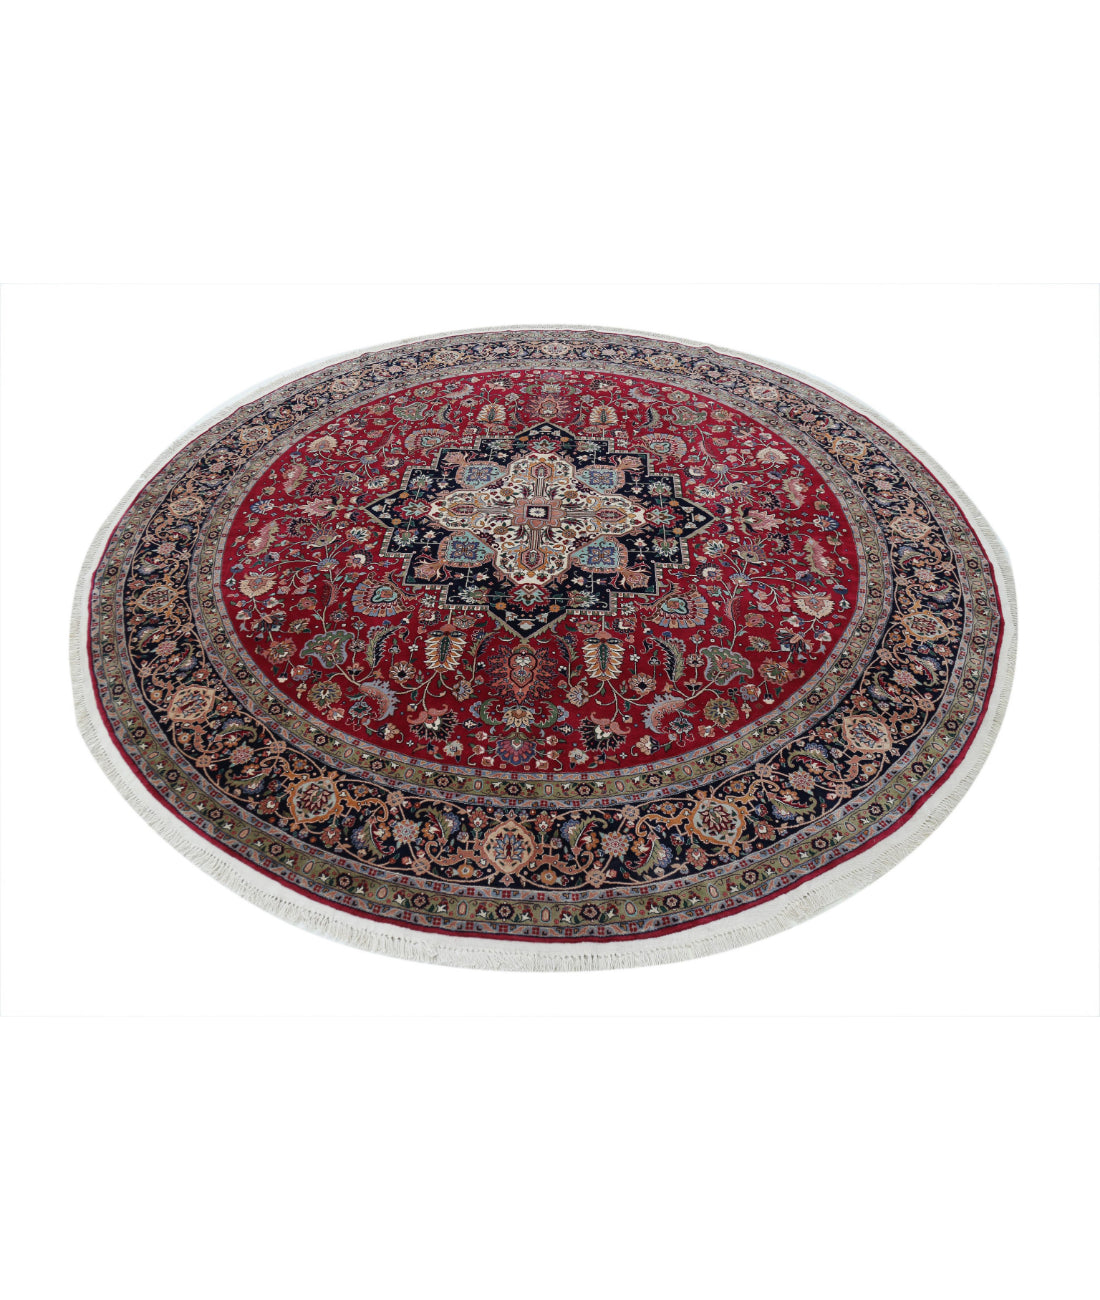 Hand Knotted Heritage Fine Persian Style Wool Rug - 8'0'' x 8'3'' 8'0'' x 8'3'' (240 X 248) / Pink / Blue